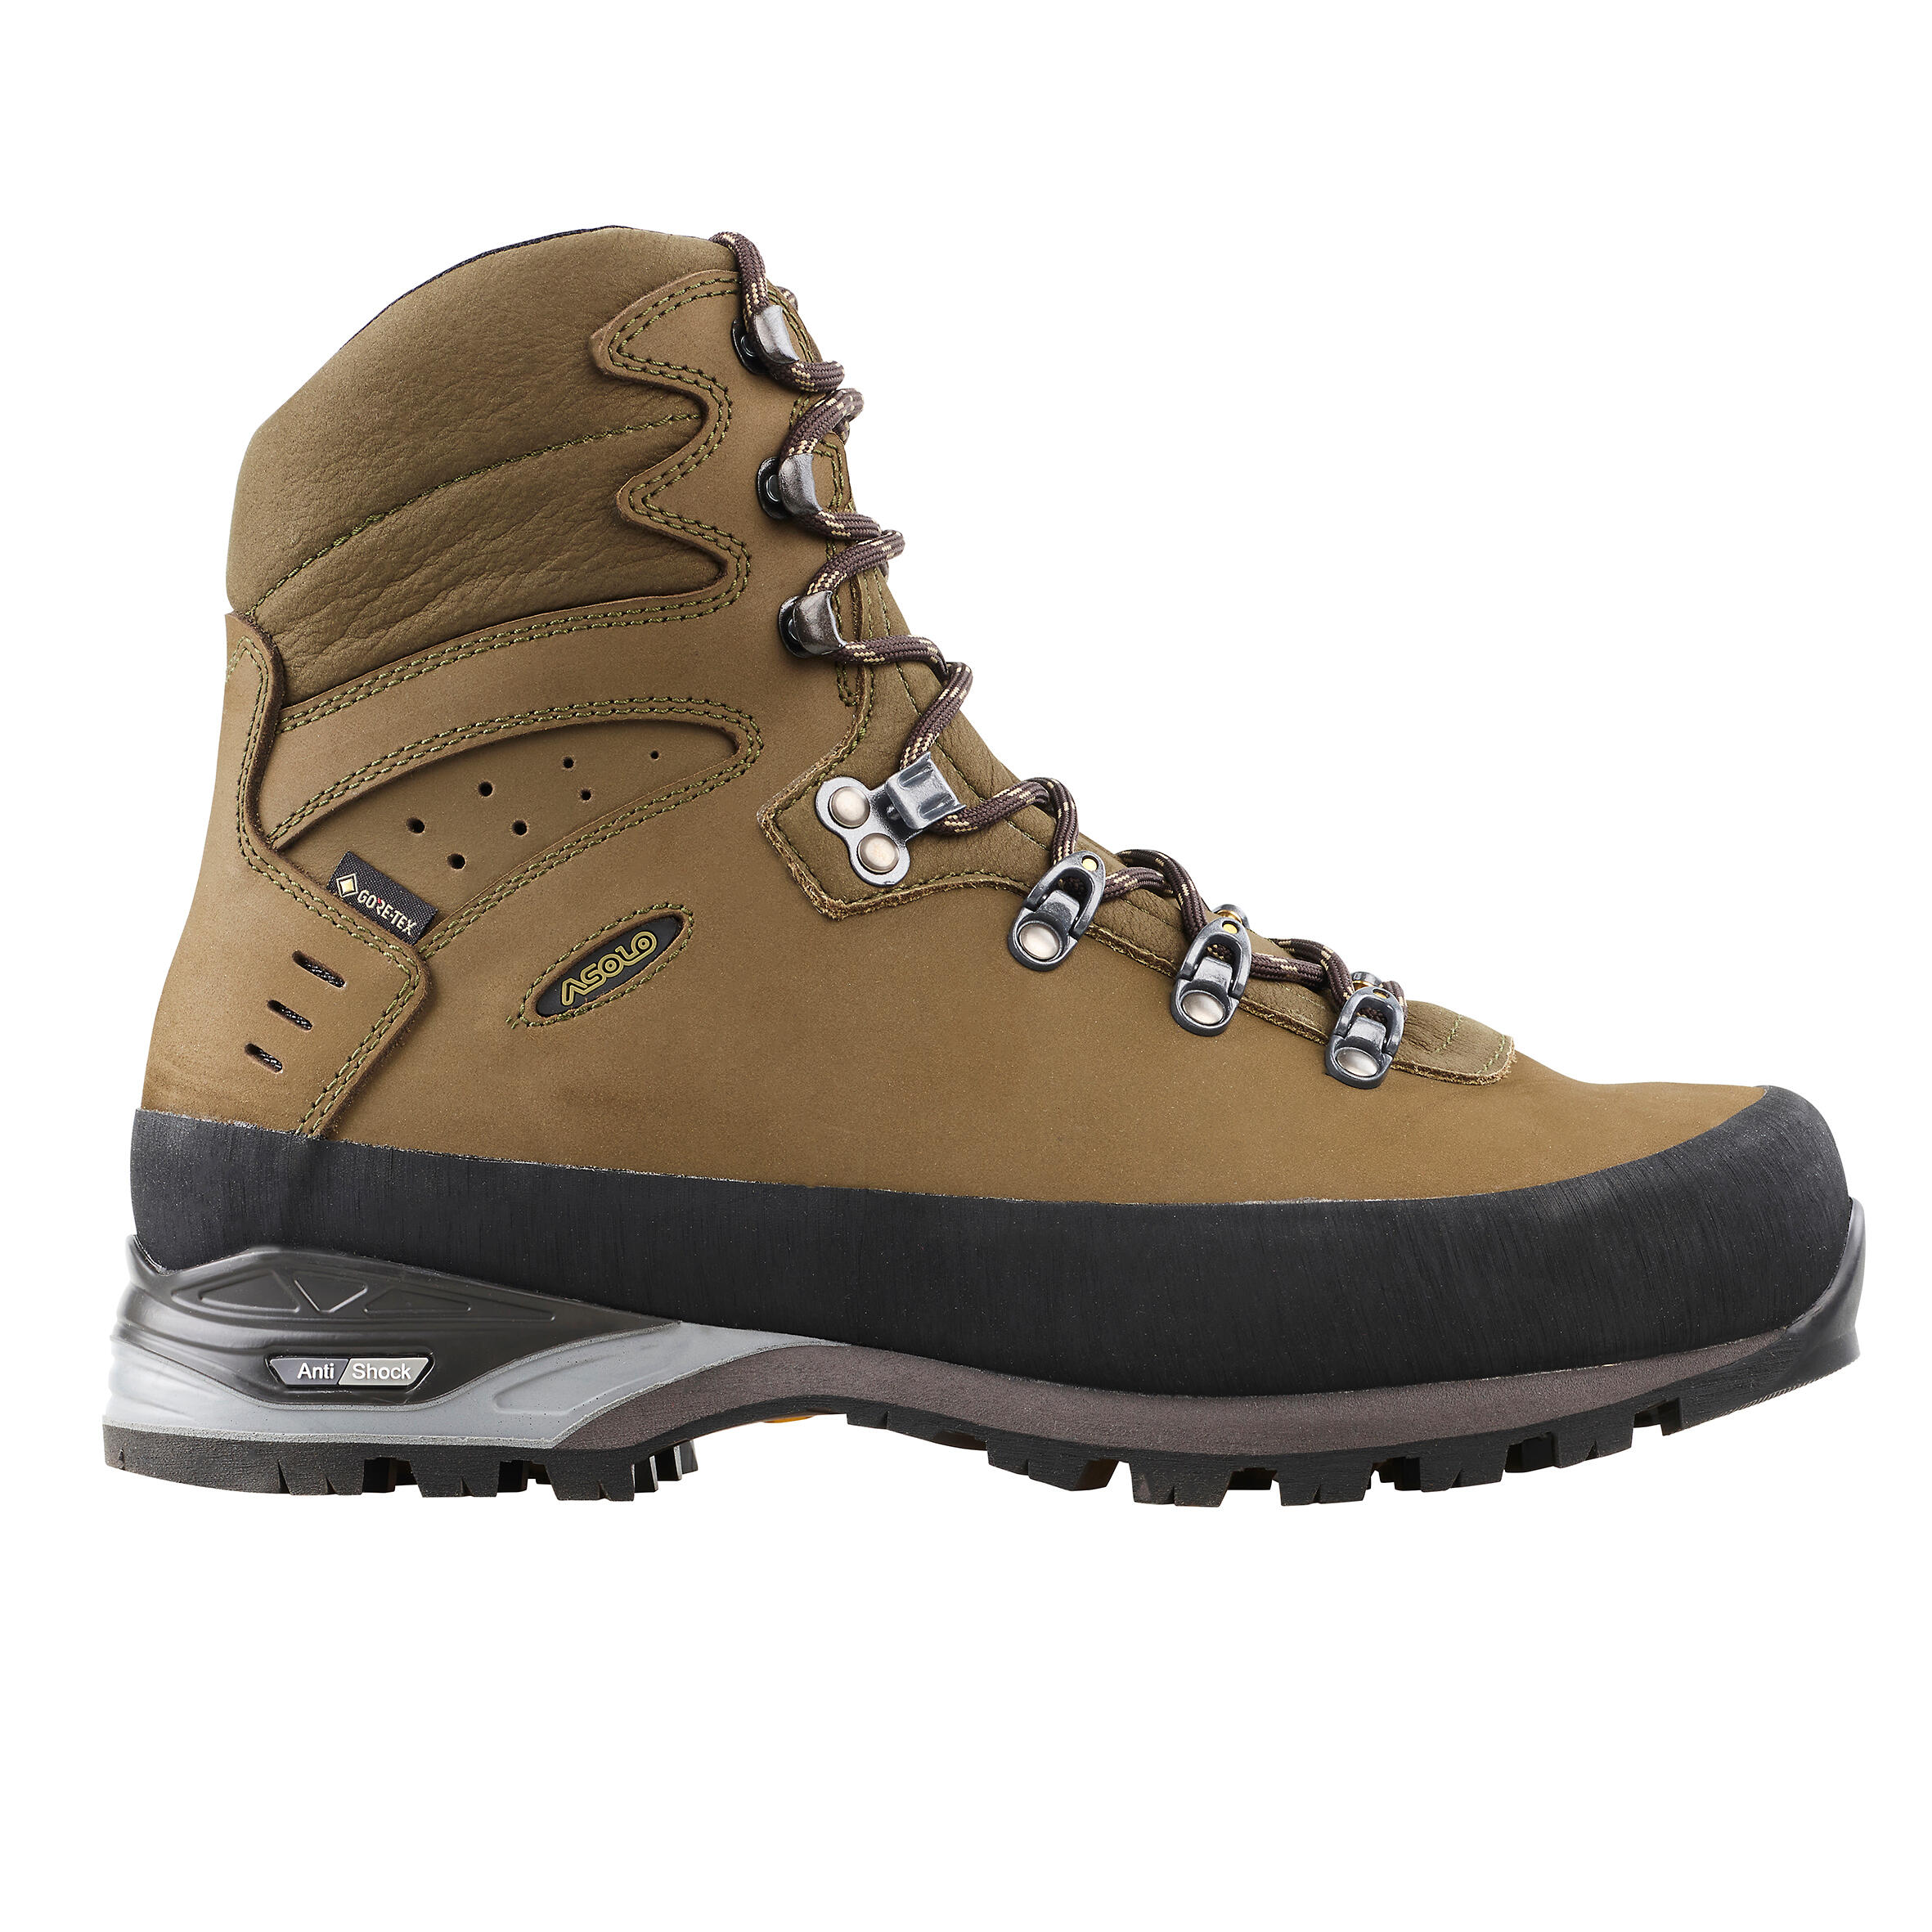 Waterproof Country Sport Boots Asolo X-Hunt Mountain Gore-Tex Vibram 3/12